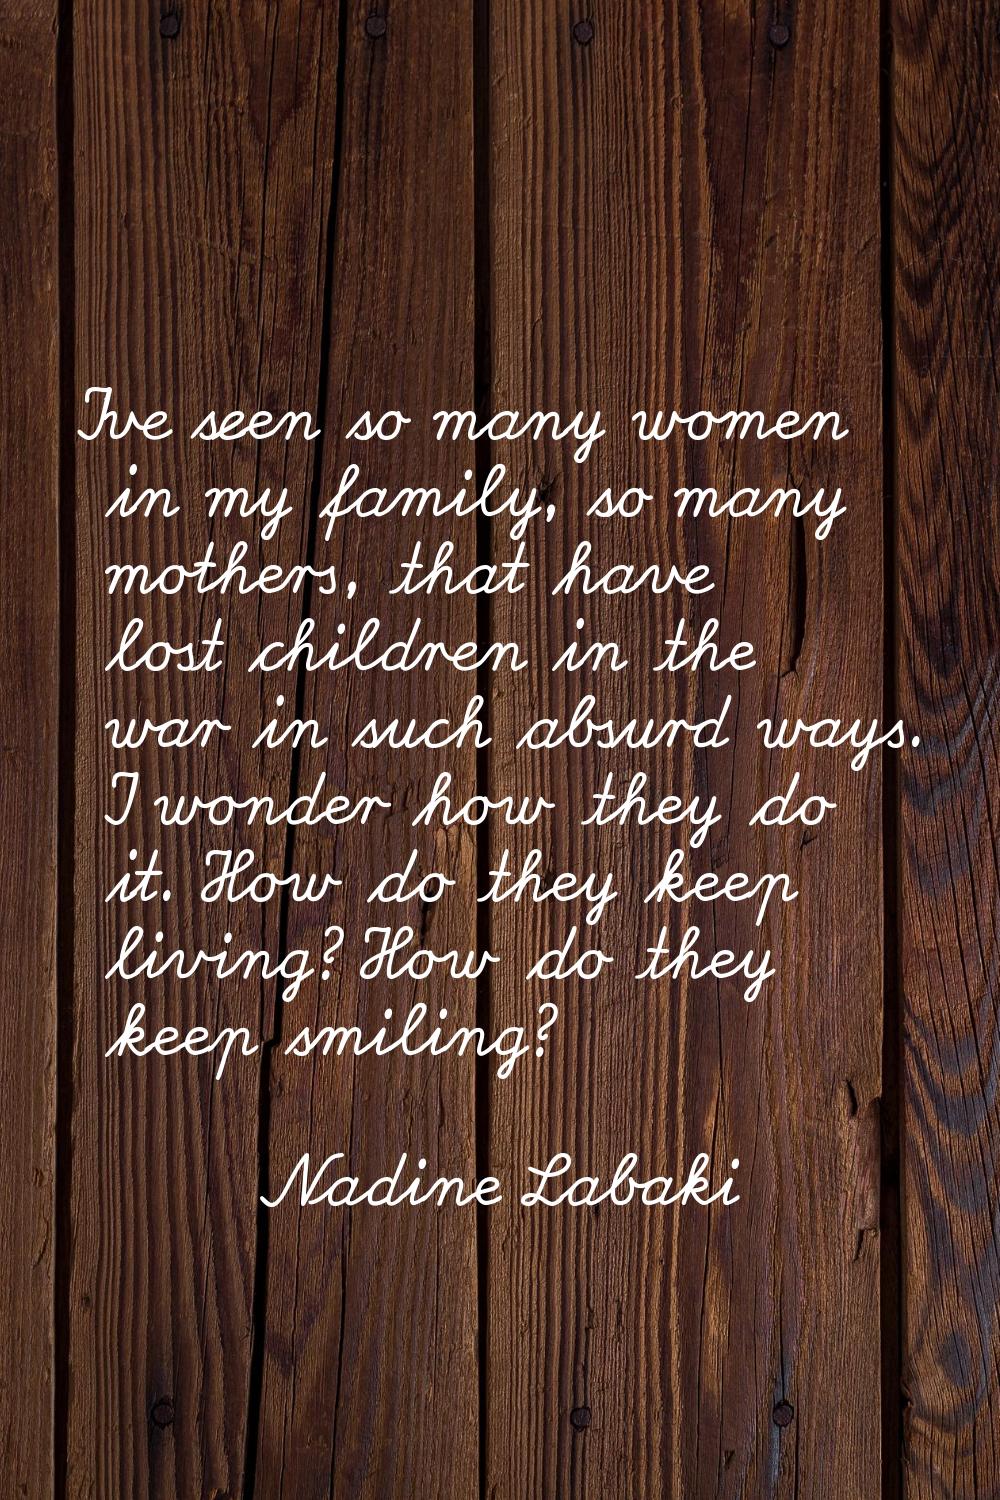 I've seen so many women in my family, so many mothers, that have lost children in the war in such a